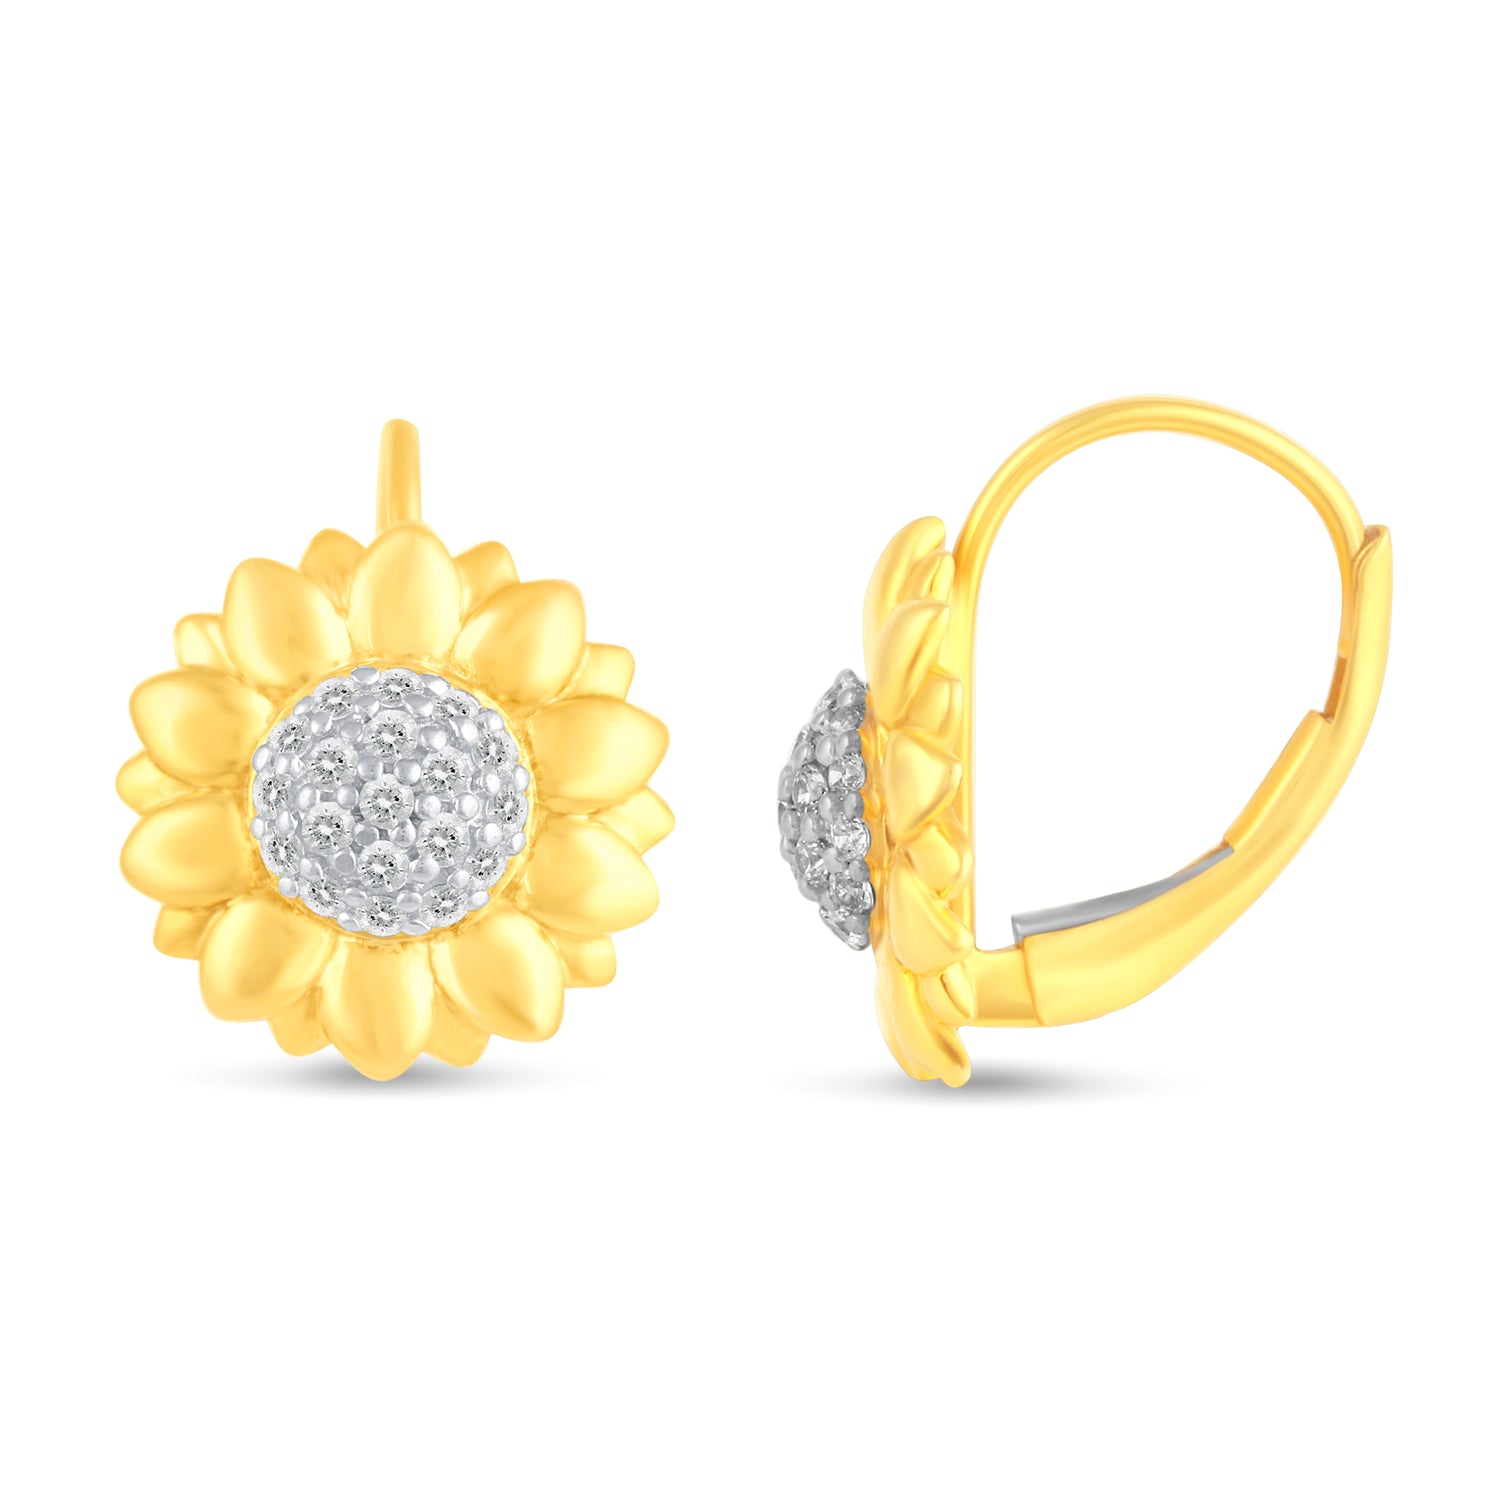 Set of 2 : 1/2 CT TW Diamond Sunflower Pendant & Earrings in 925 Sterling Silver Yellow Gold